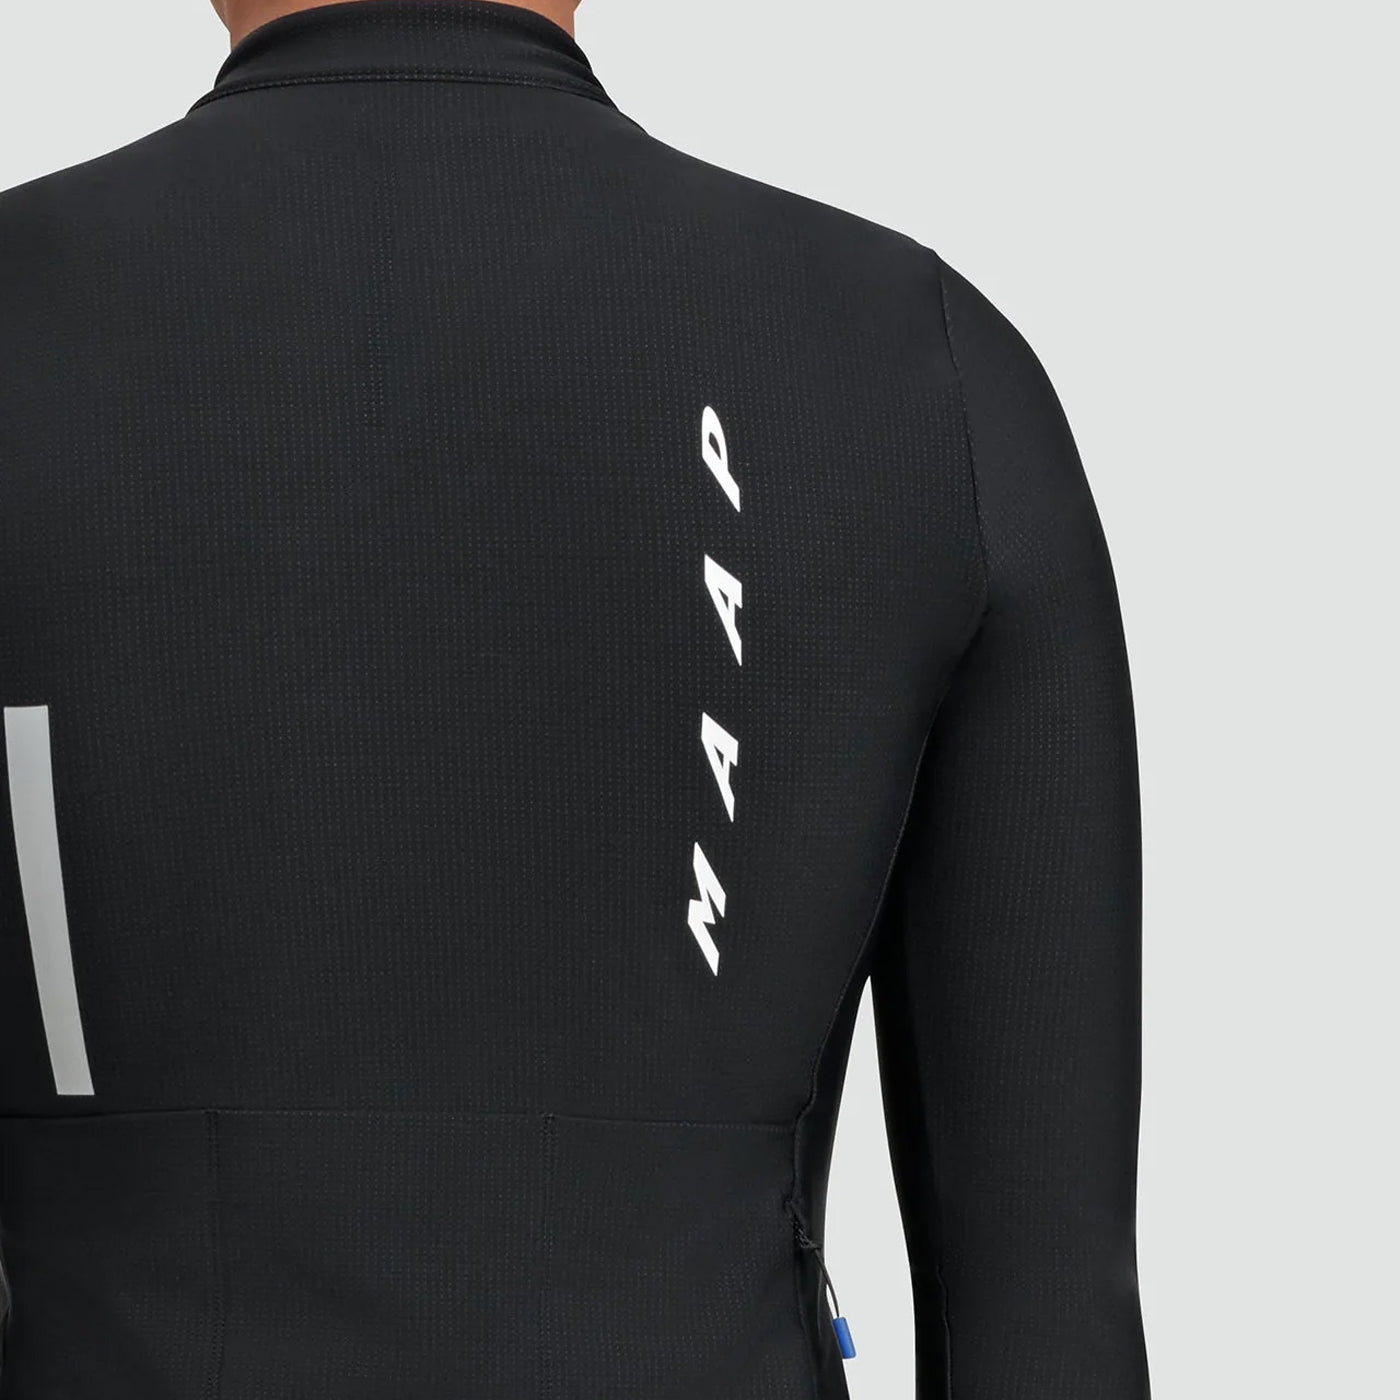 Maap Evade Thermal 2.0 long sleeve jersey - Black | All4cycling